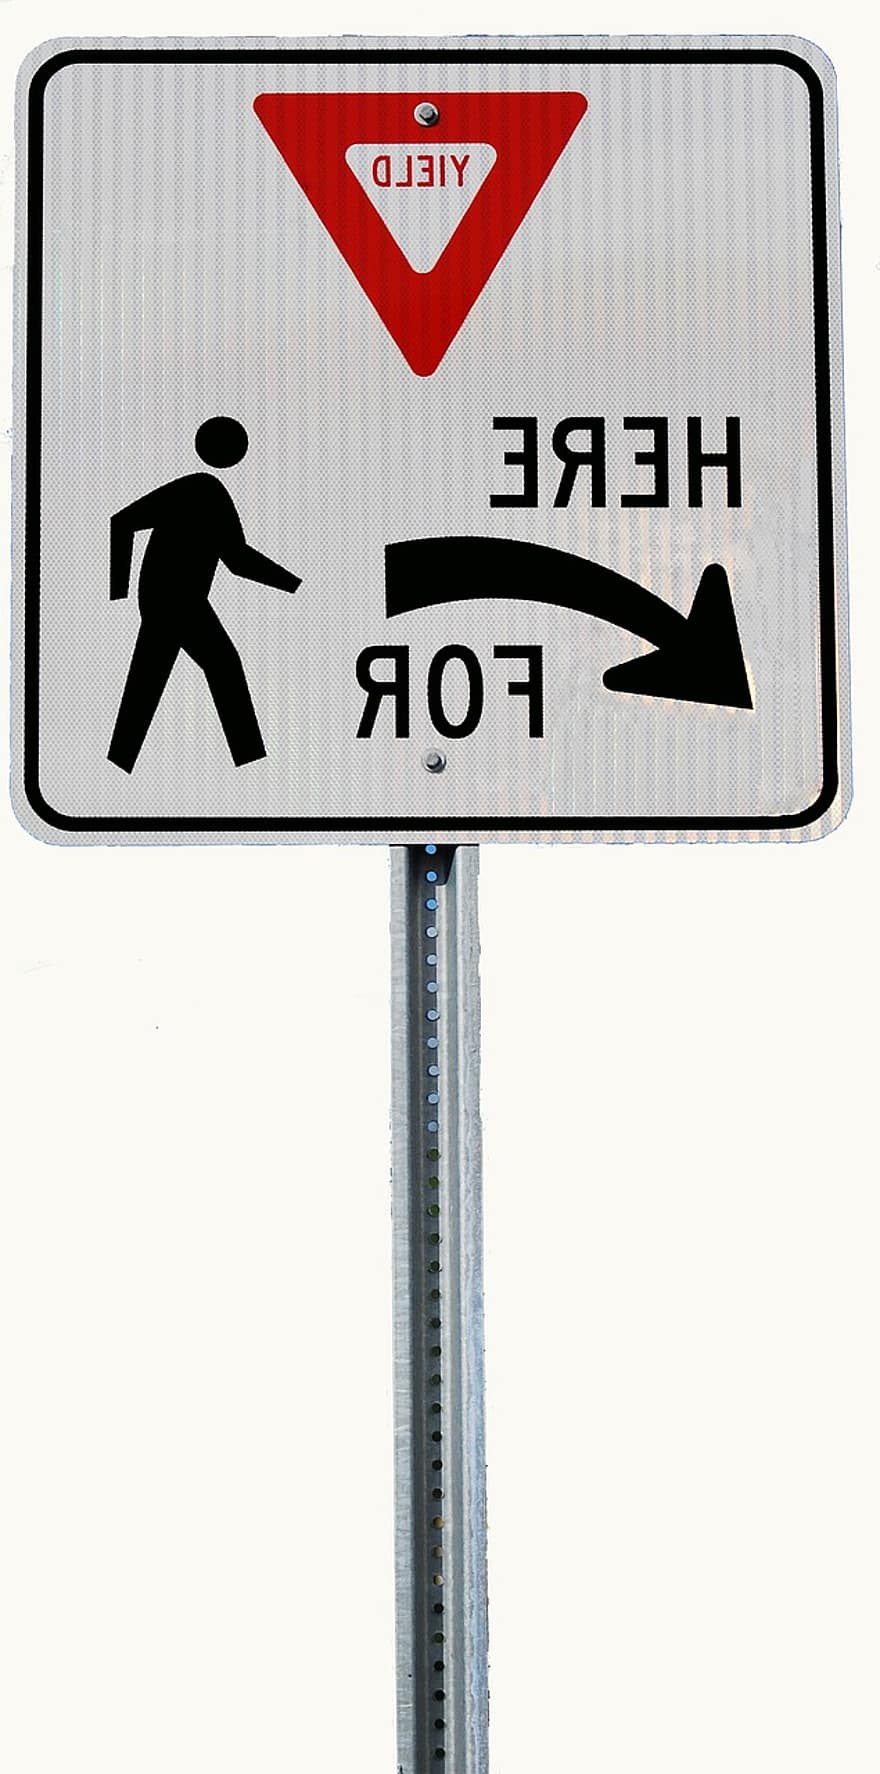 Yield Sign, Traffic Sign, Road Sign, Street Sign, Warning, sign, warning sign, symbol, traffic, directional sign, direction